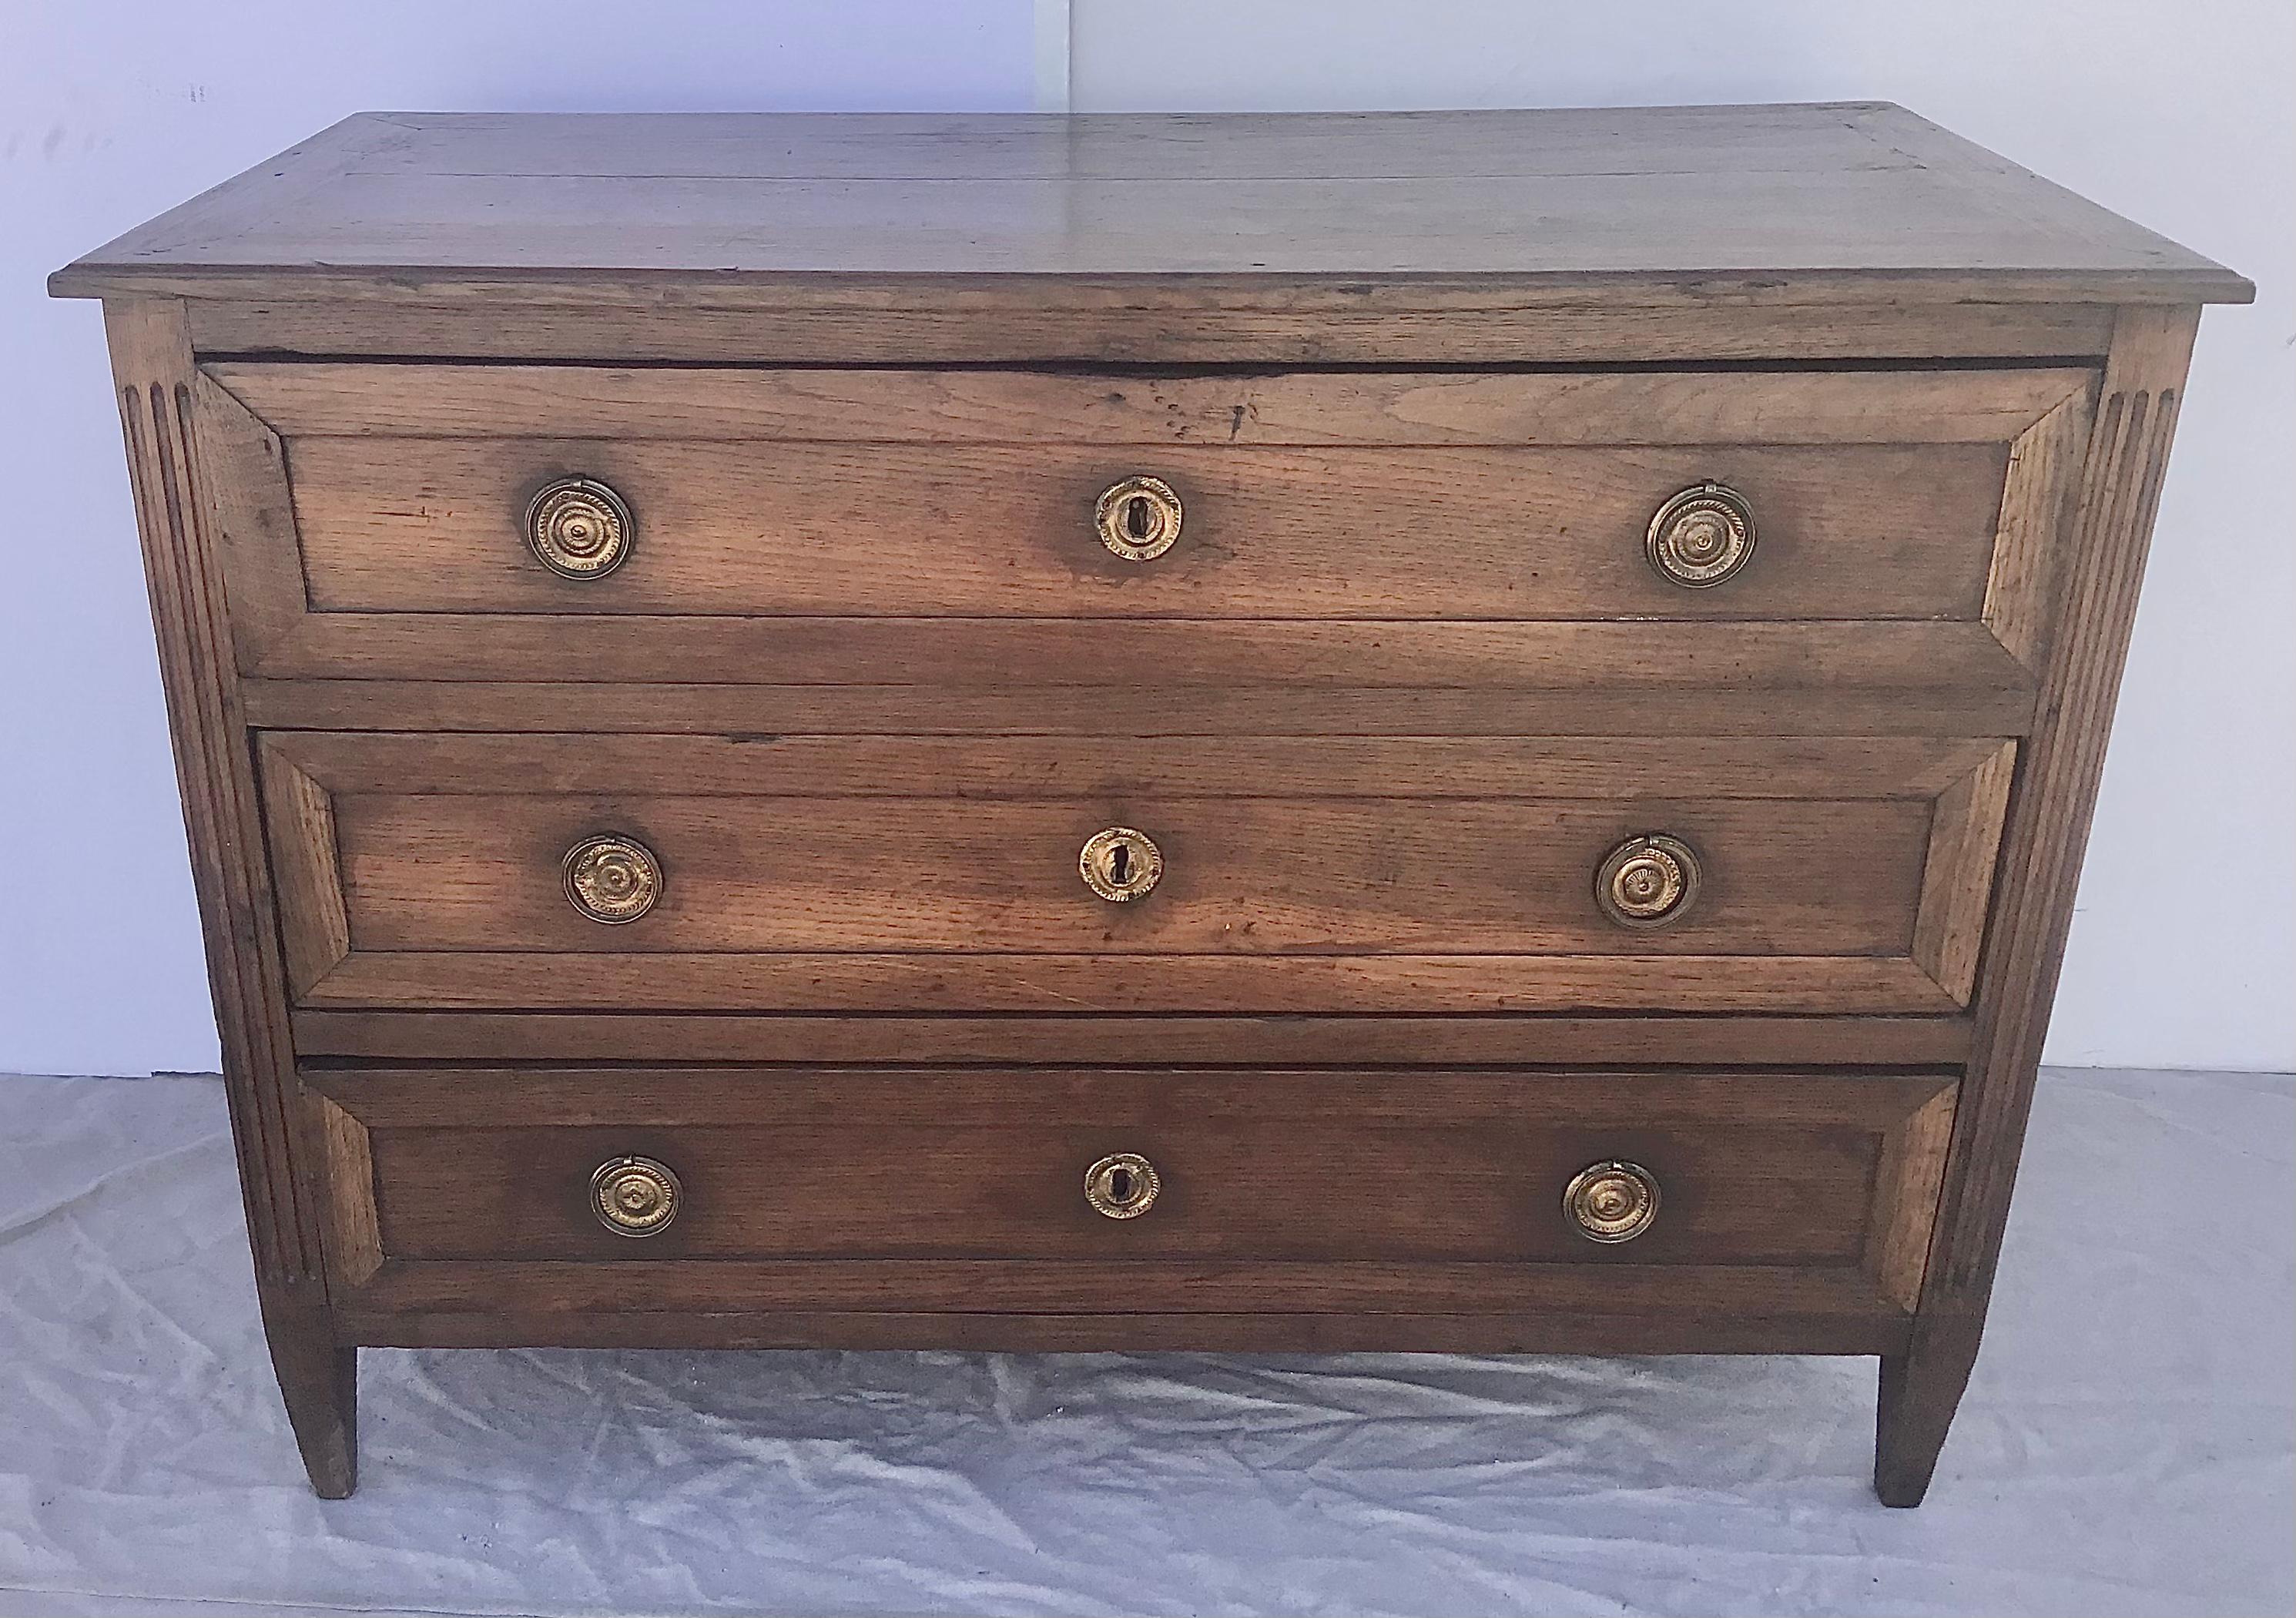 A French neoclassic three-drawer commode with brass trim and tapered feet from the early 19th century. French commode features an exquisite slightly raised rectangular planked top. Three hand-cut dovetailed drawers make up the façade, surrounding